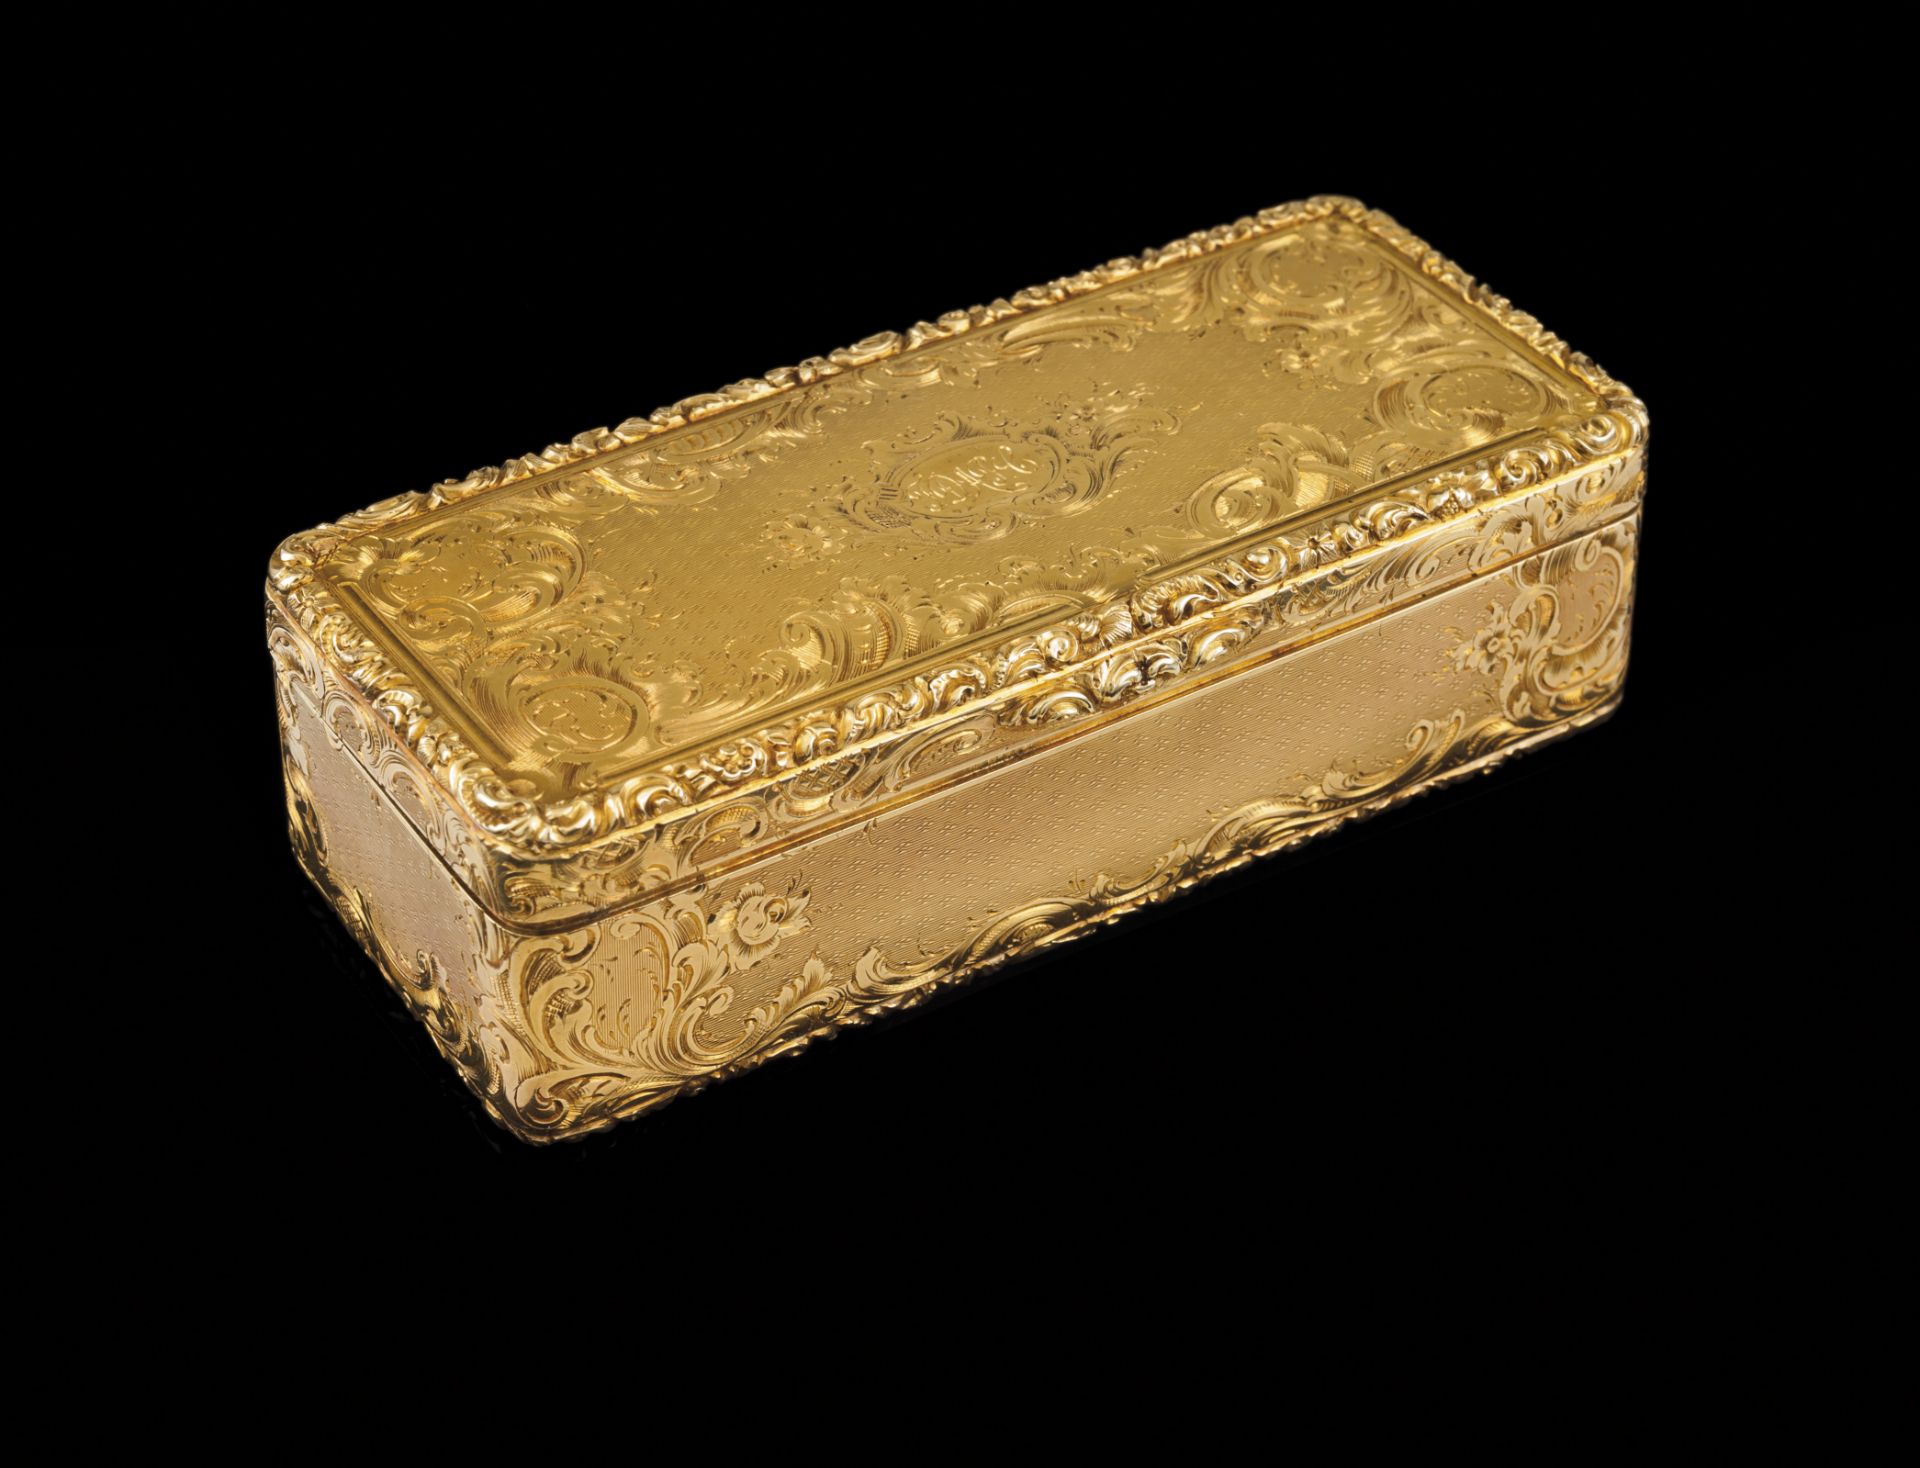 A snuff boxGoldGuilloche and chiselled Rocaille decoration of winglets, shell motifs and